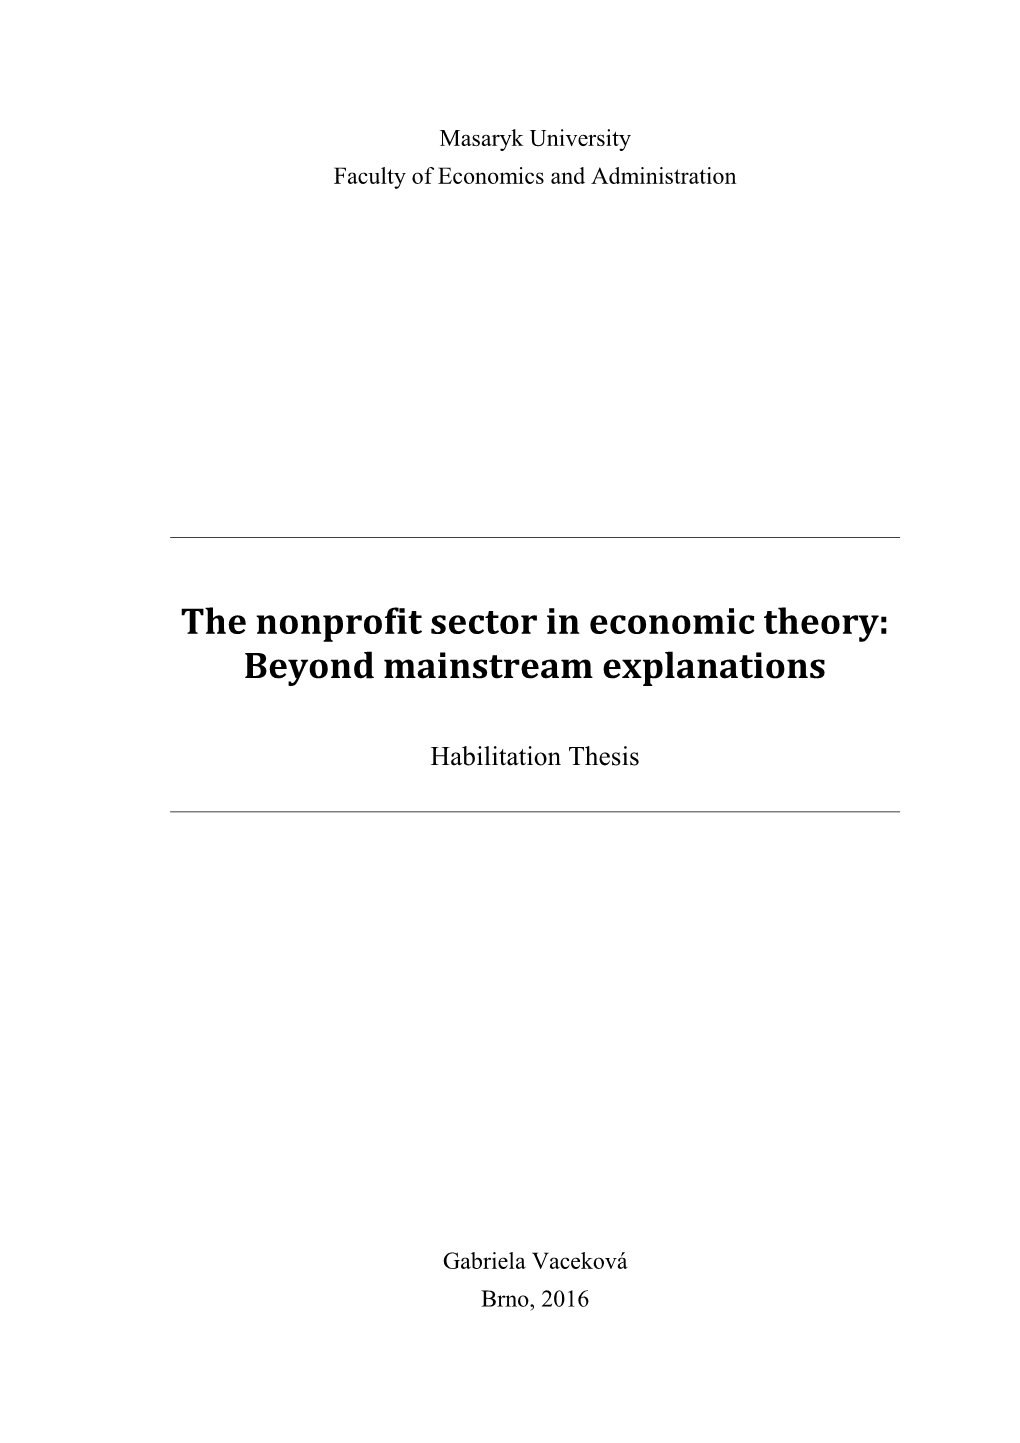 The Nonprofit Sector in Economic Theory: Beyond Mainstream Explanations